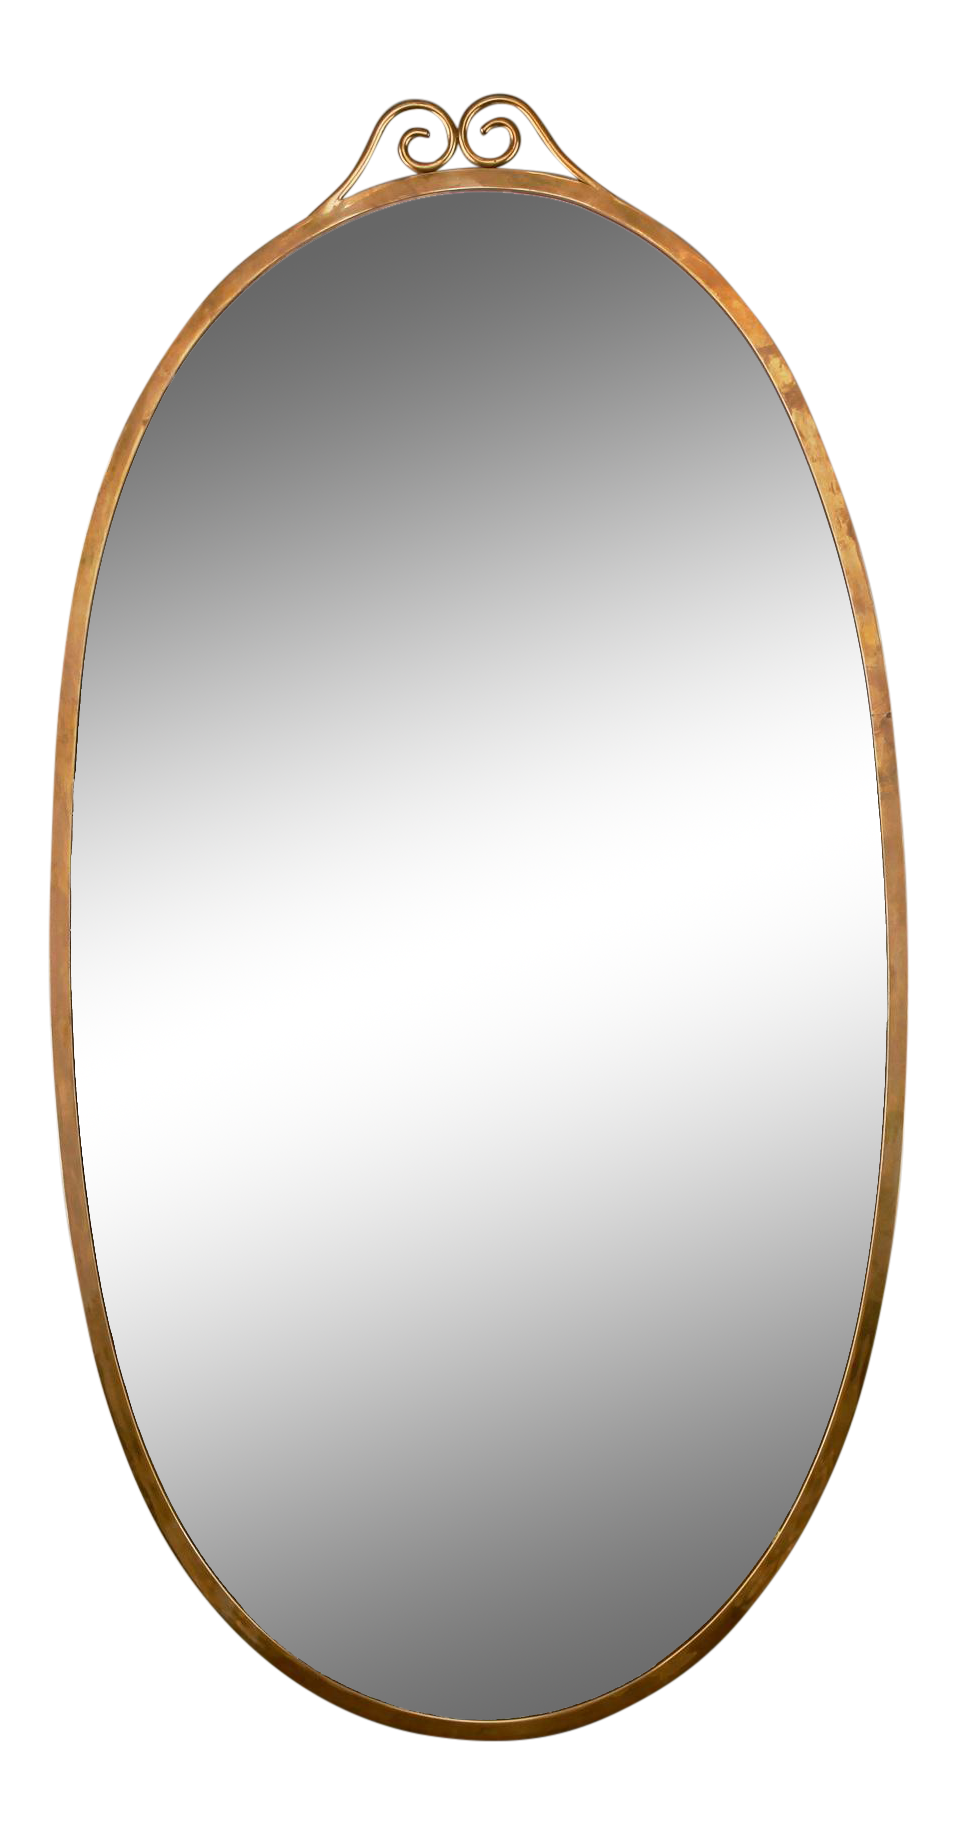 mirror clipart oval shaped object